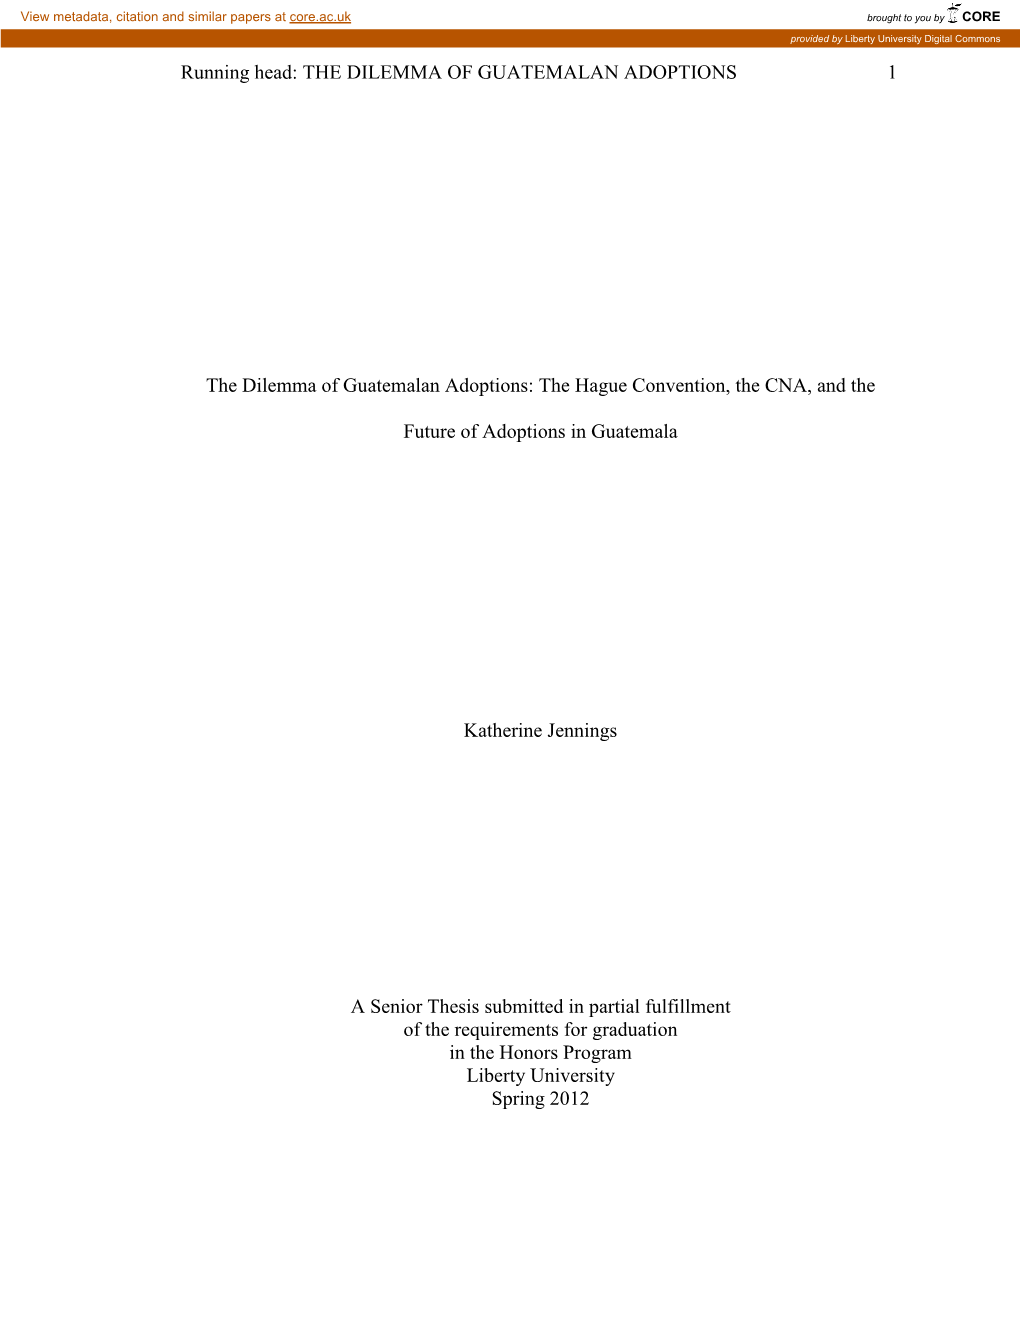 The Dilemma of Guatemalan Adoptions: the Hague Convention, the CNA, and The